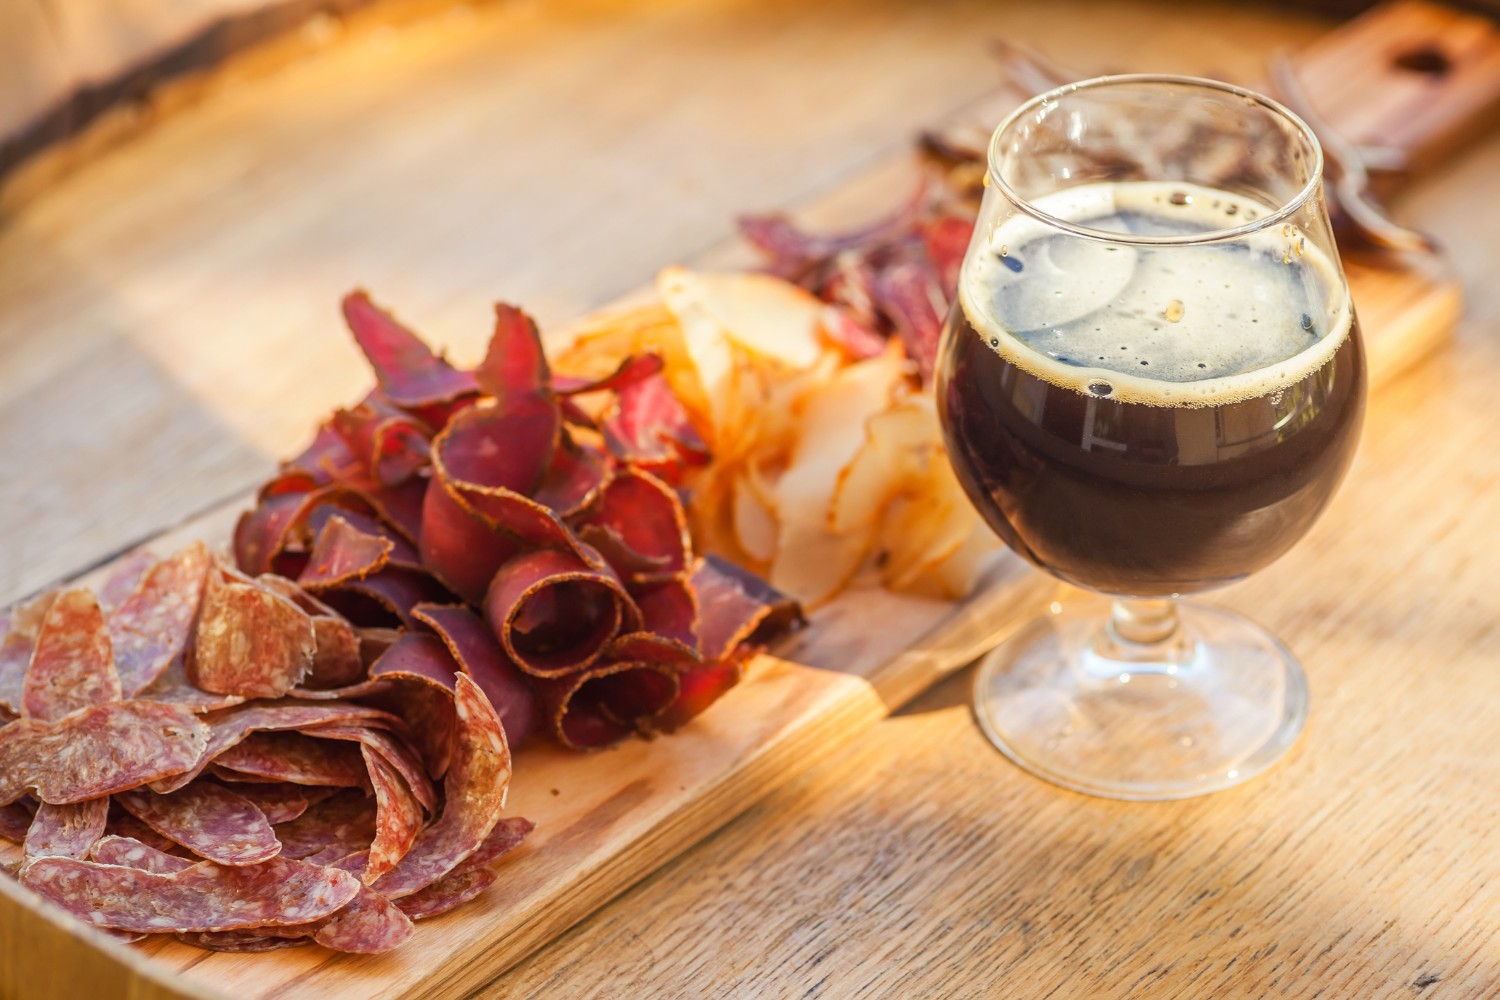 Craft beer and snacks at a local Asheville brewery. Read our blog on Asheville breweries for our top recommendations!